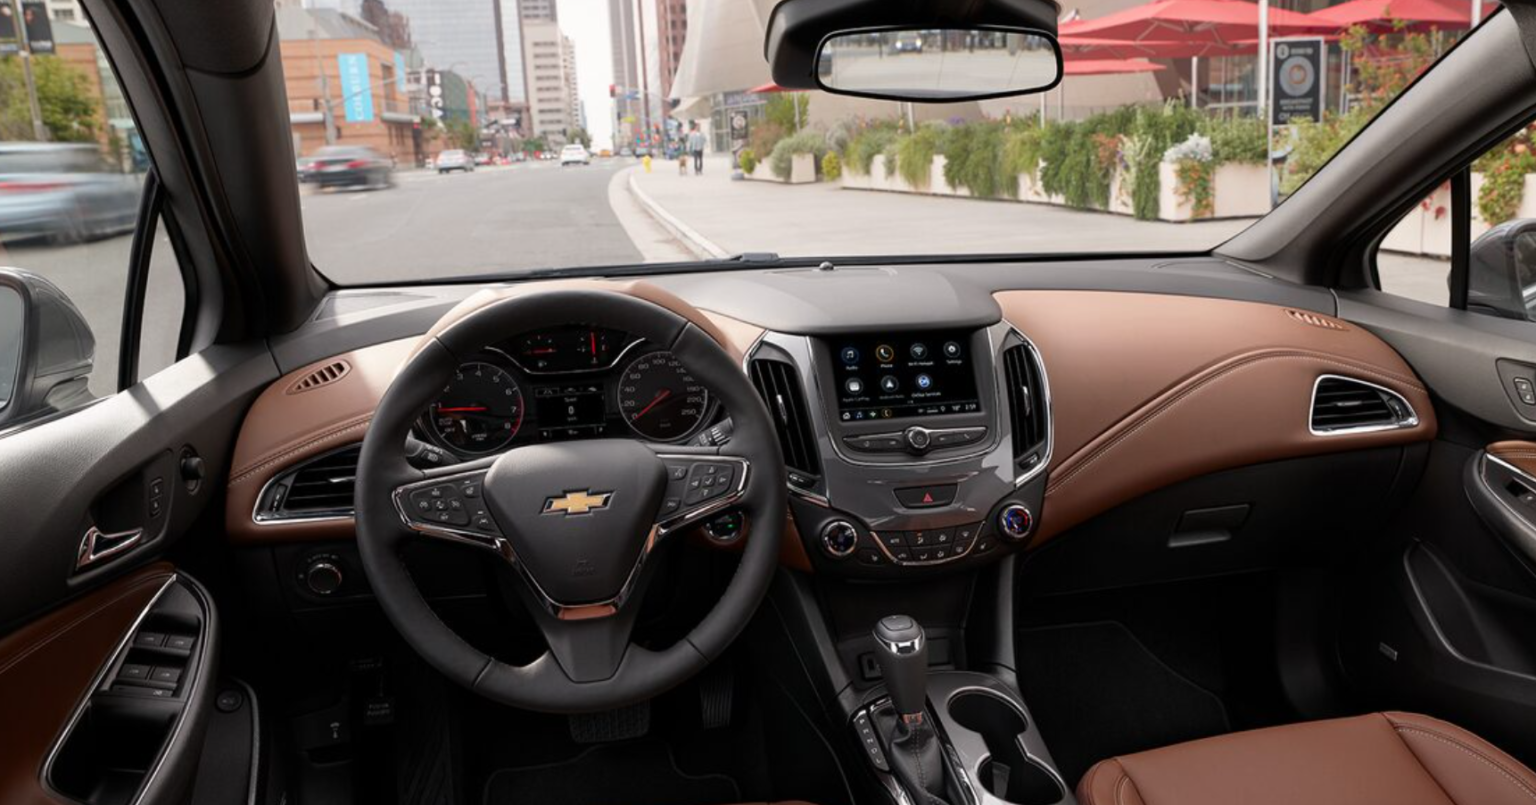 2024 Chevy Cruze Thermostat, Release Date, Specs